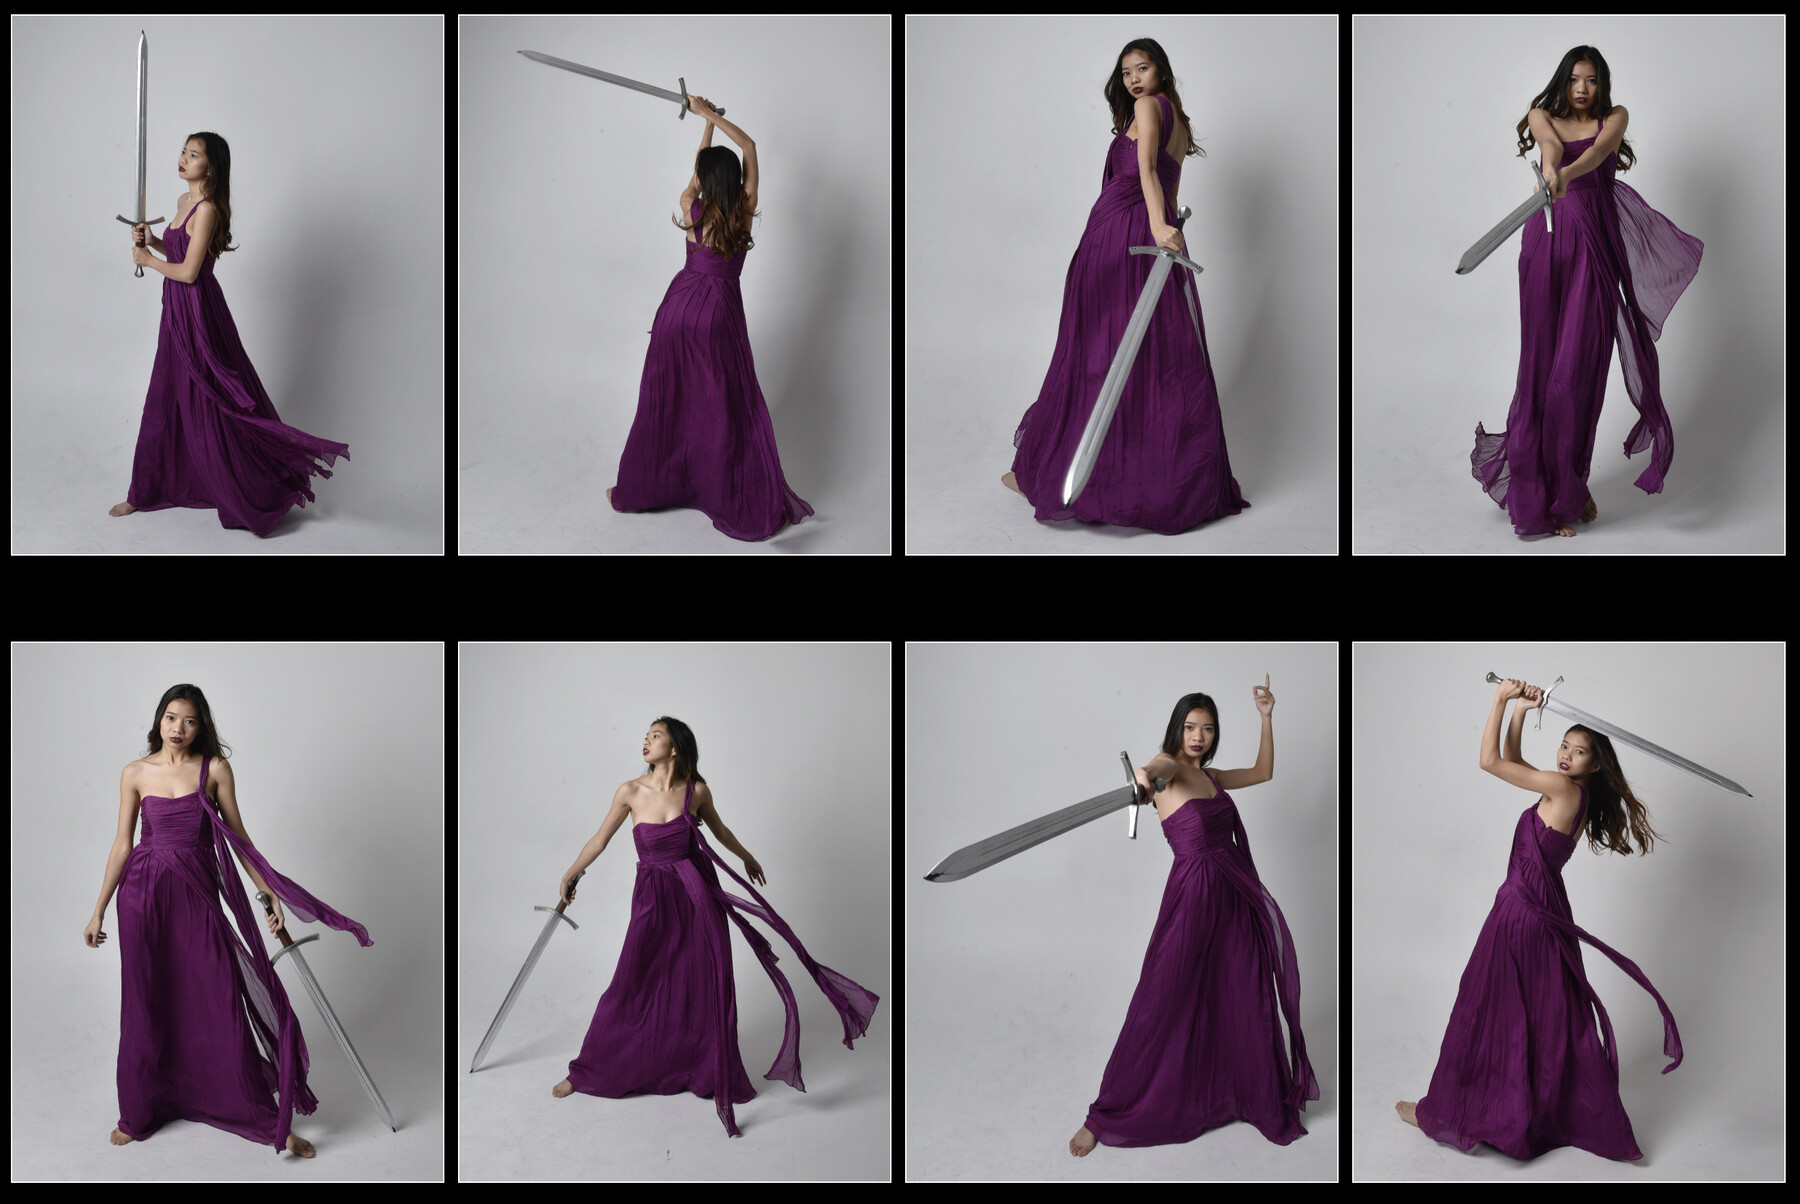 Pose ideas in a gown | Fashion poses, Masquerade ball gown, Photography  poses